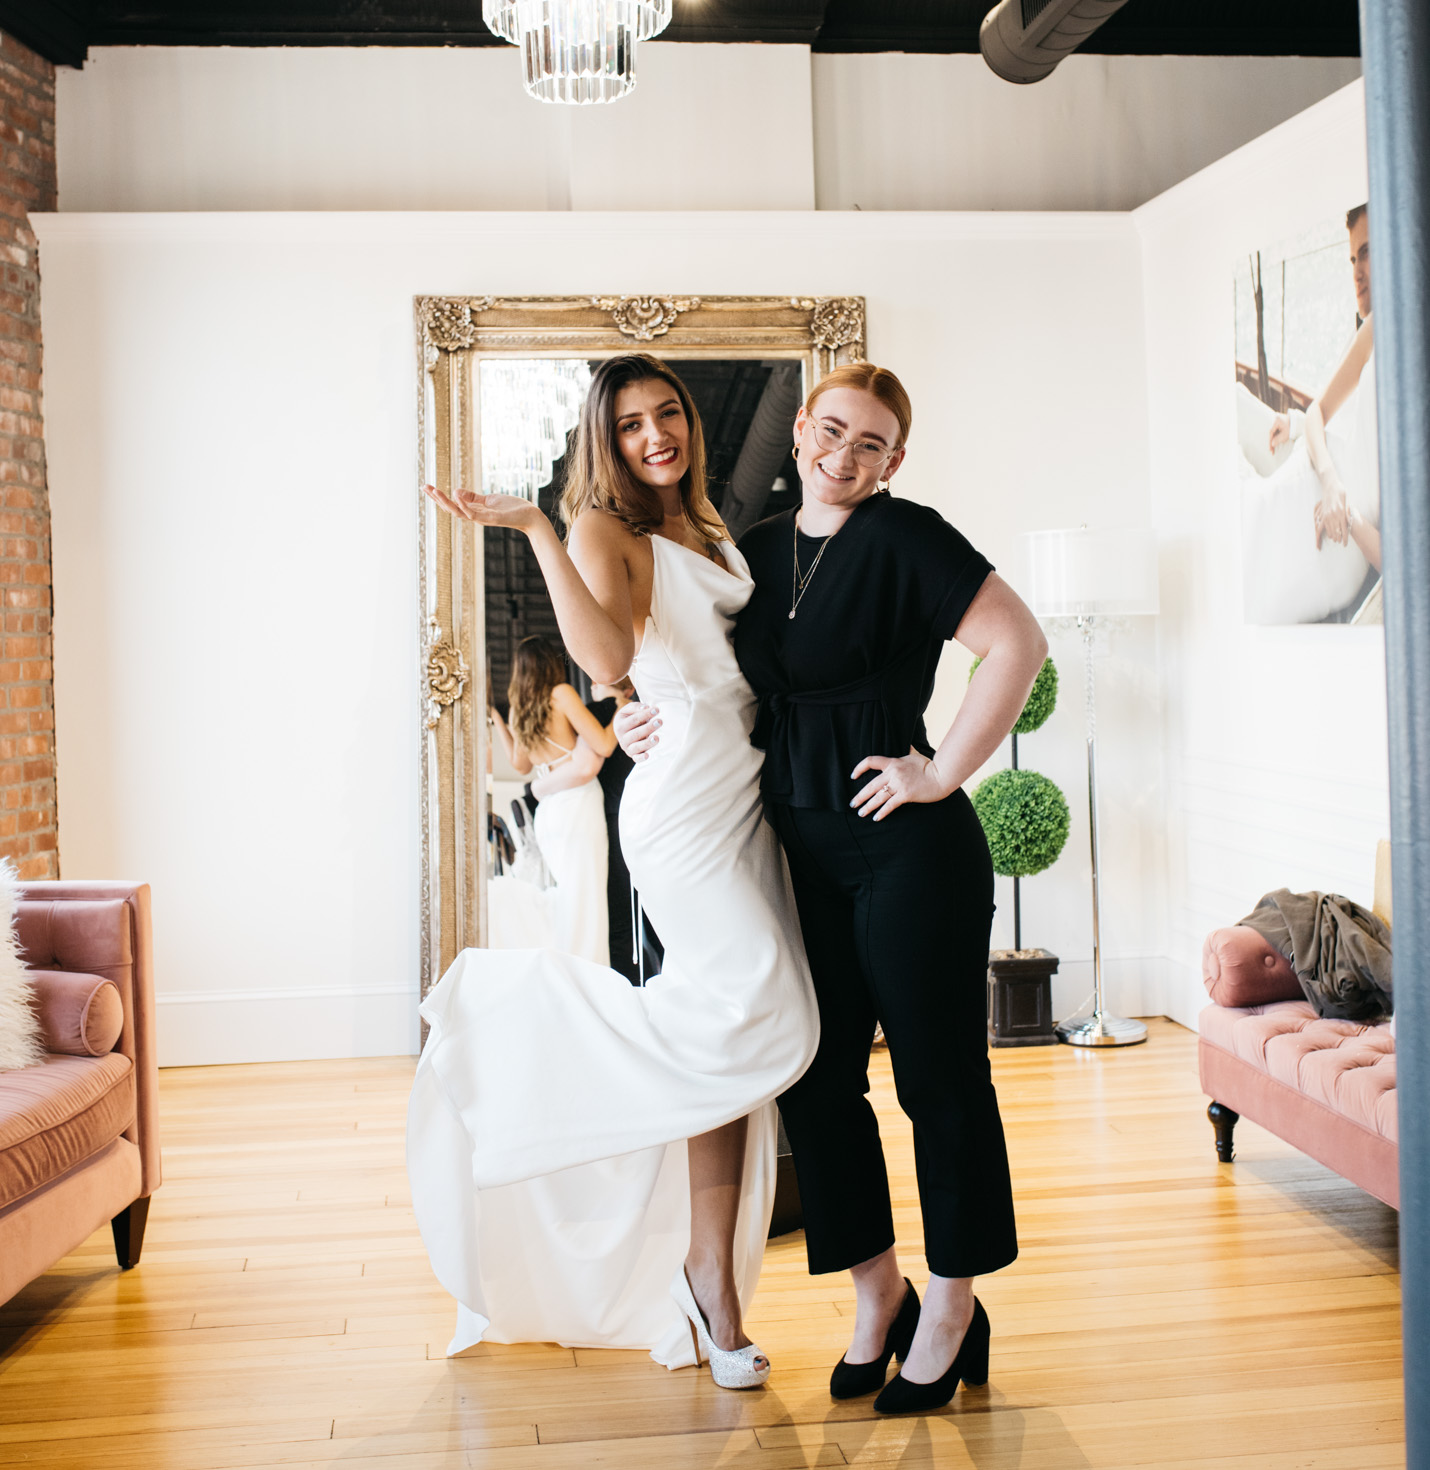 A bride smiling with a store assistant trying on a dress.